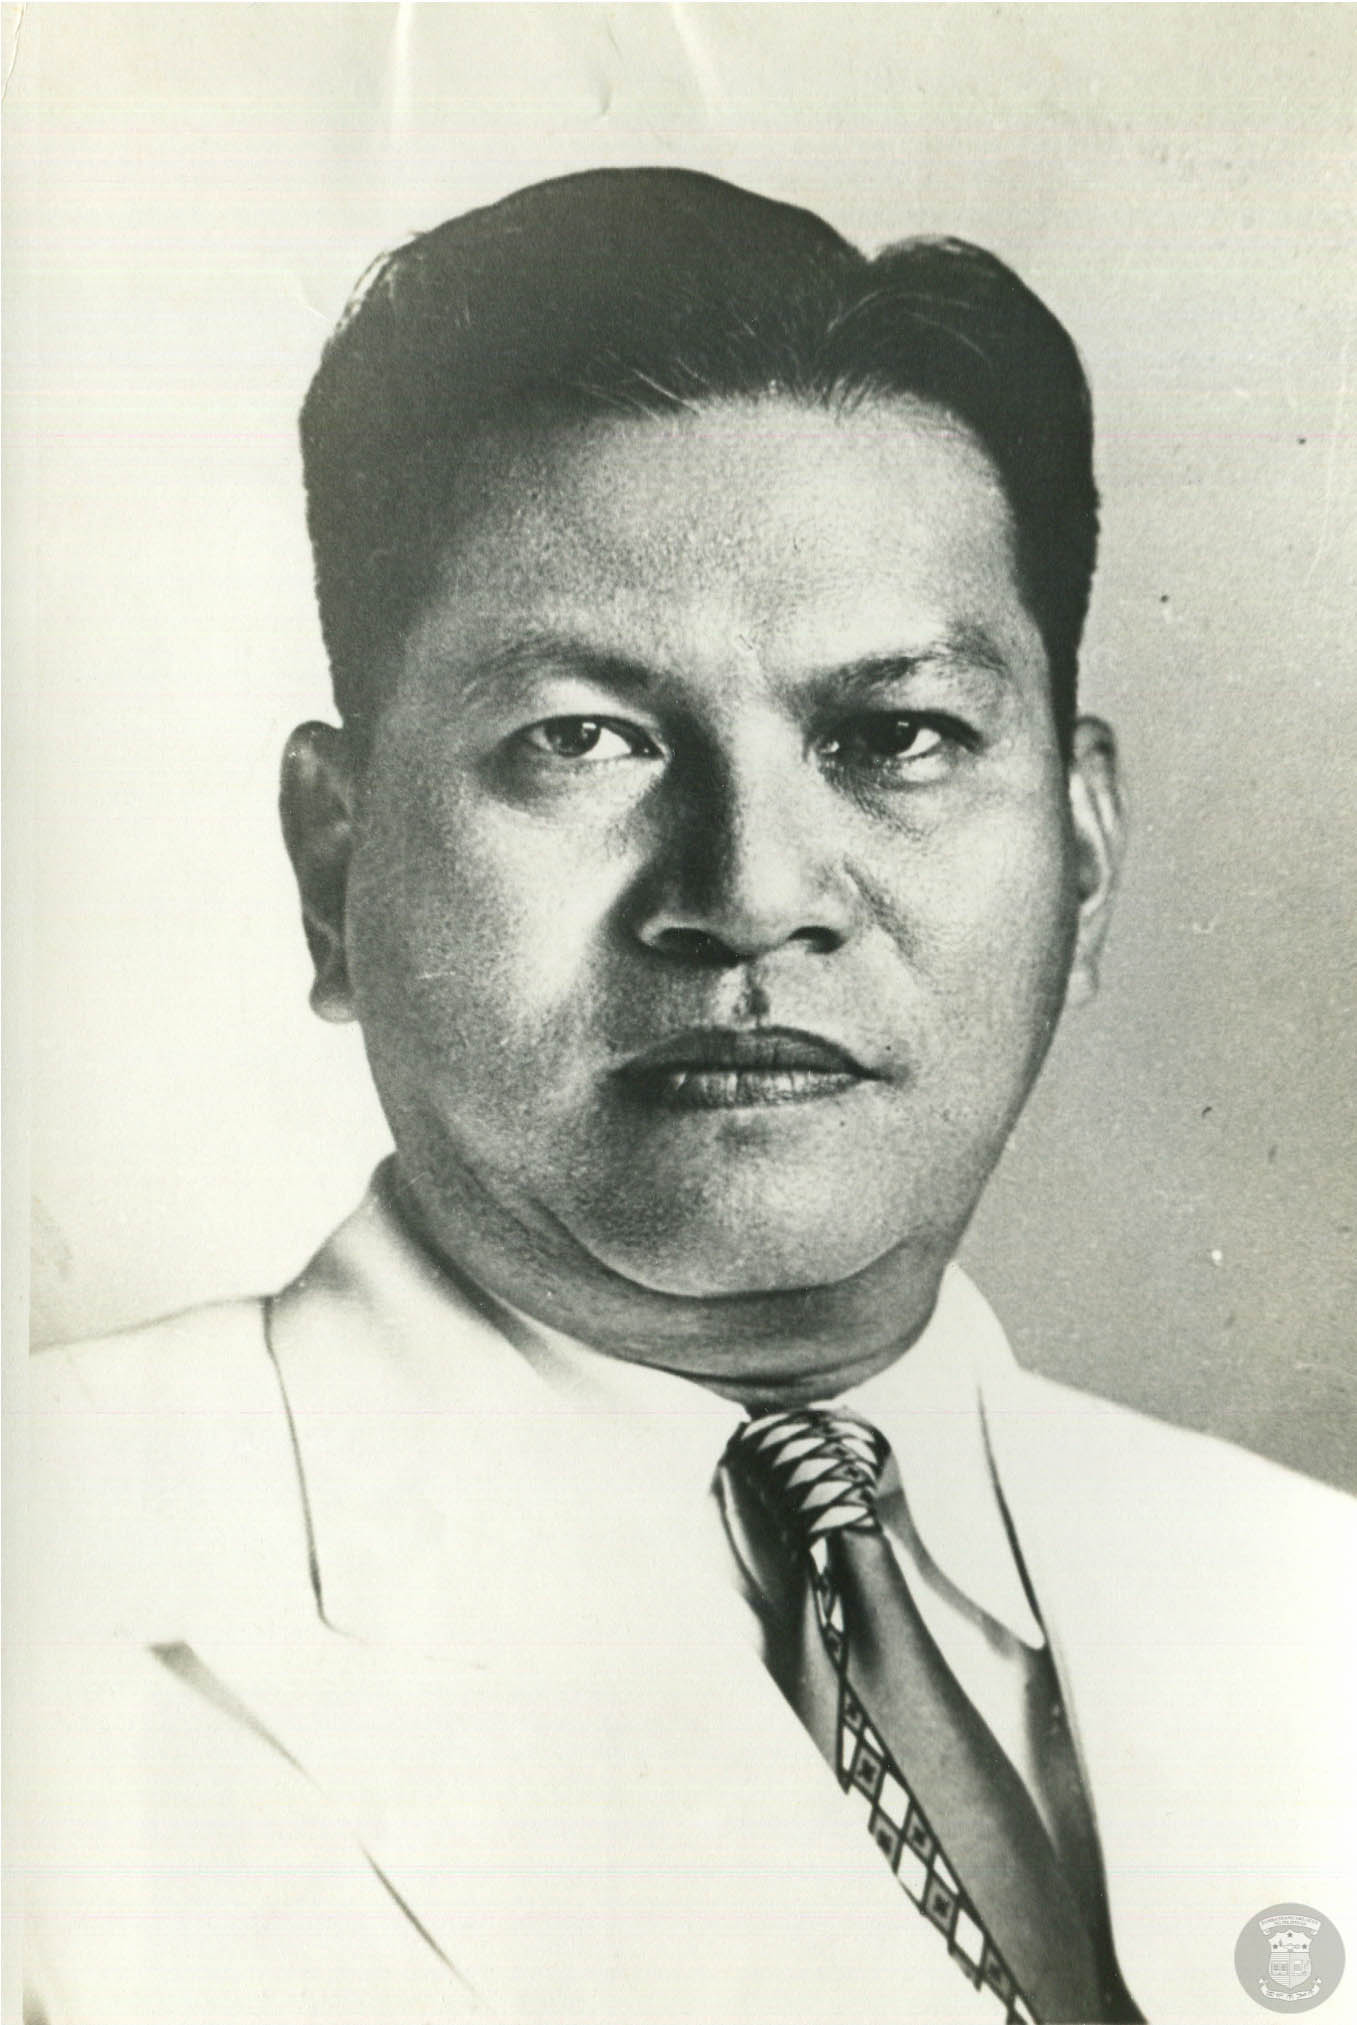 why ramon magsaysay is a great leader essay